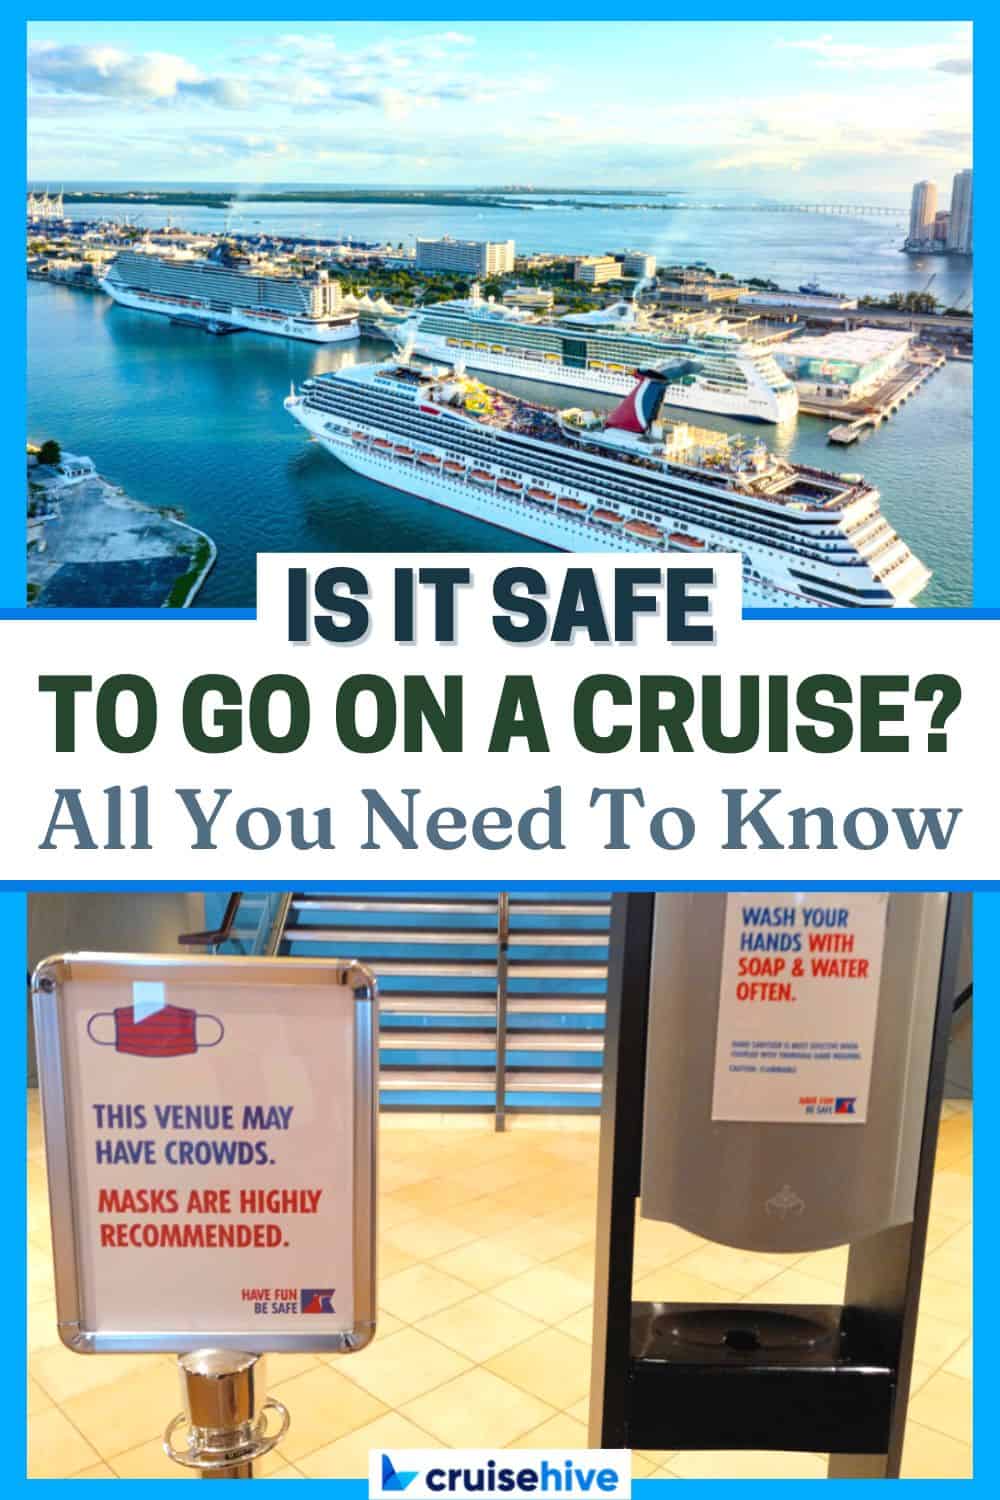 Is It Safe To Go On a Cruise